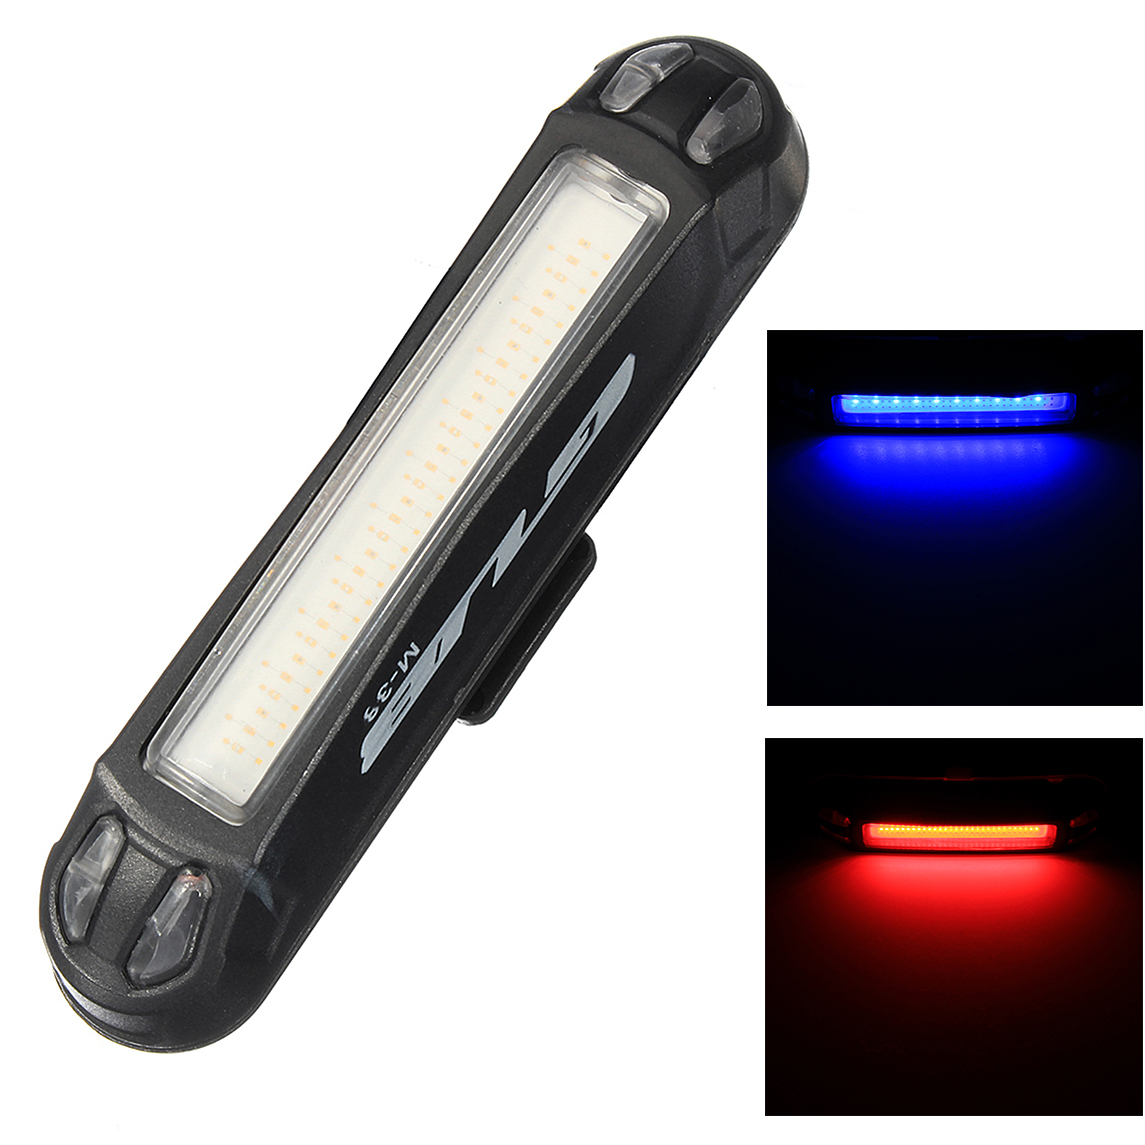 

GUB M-39 100LM Waterproof USB Rechargeable Bicycle Dual Color Red/Blue LED Lights 6 Modes Safety Warning Light